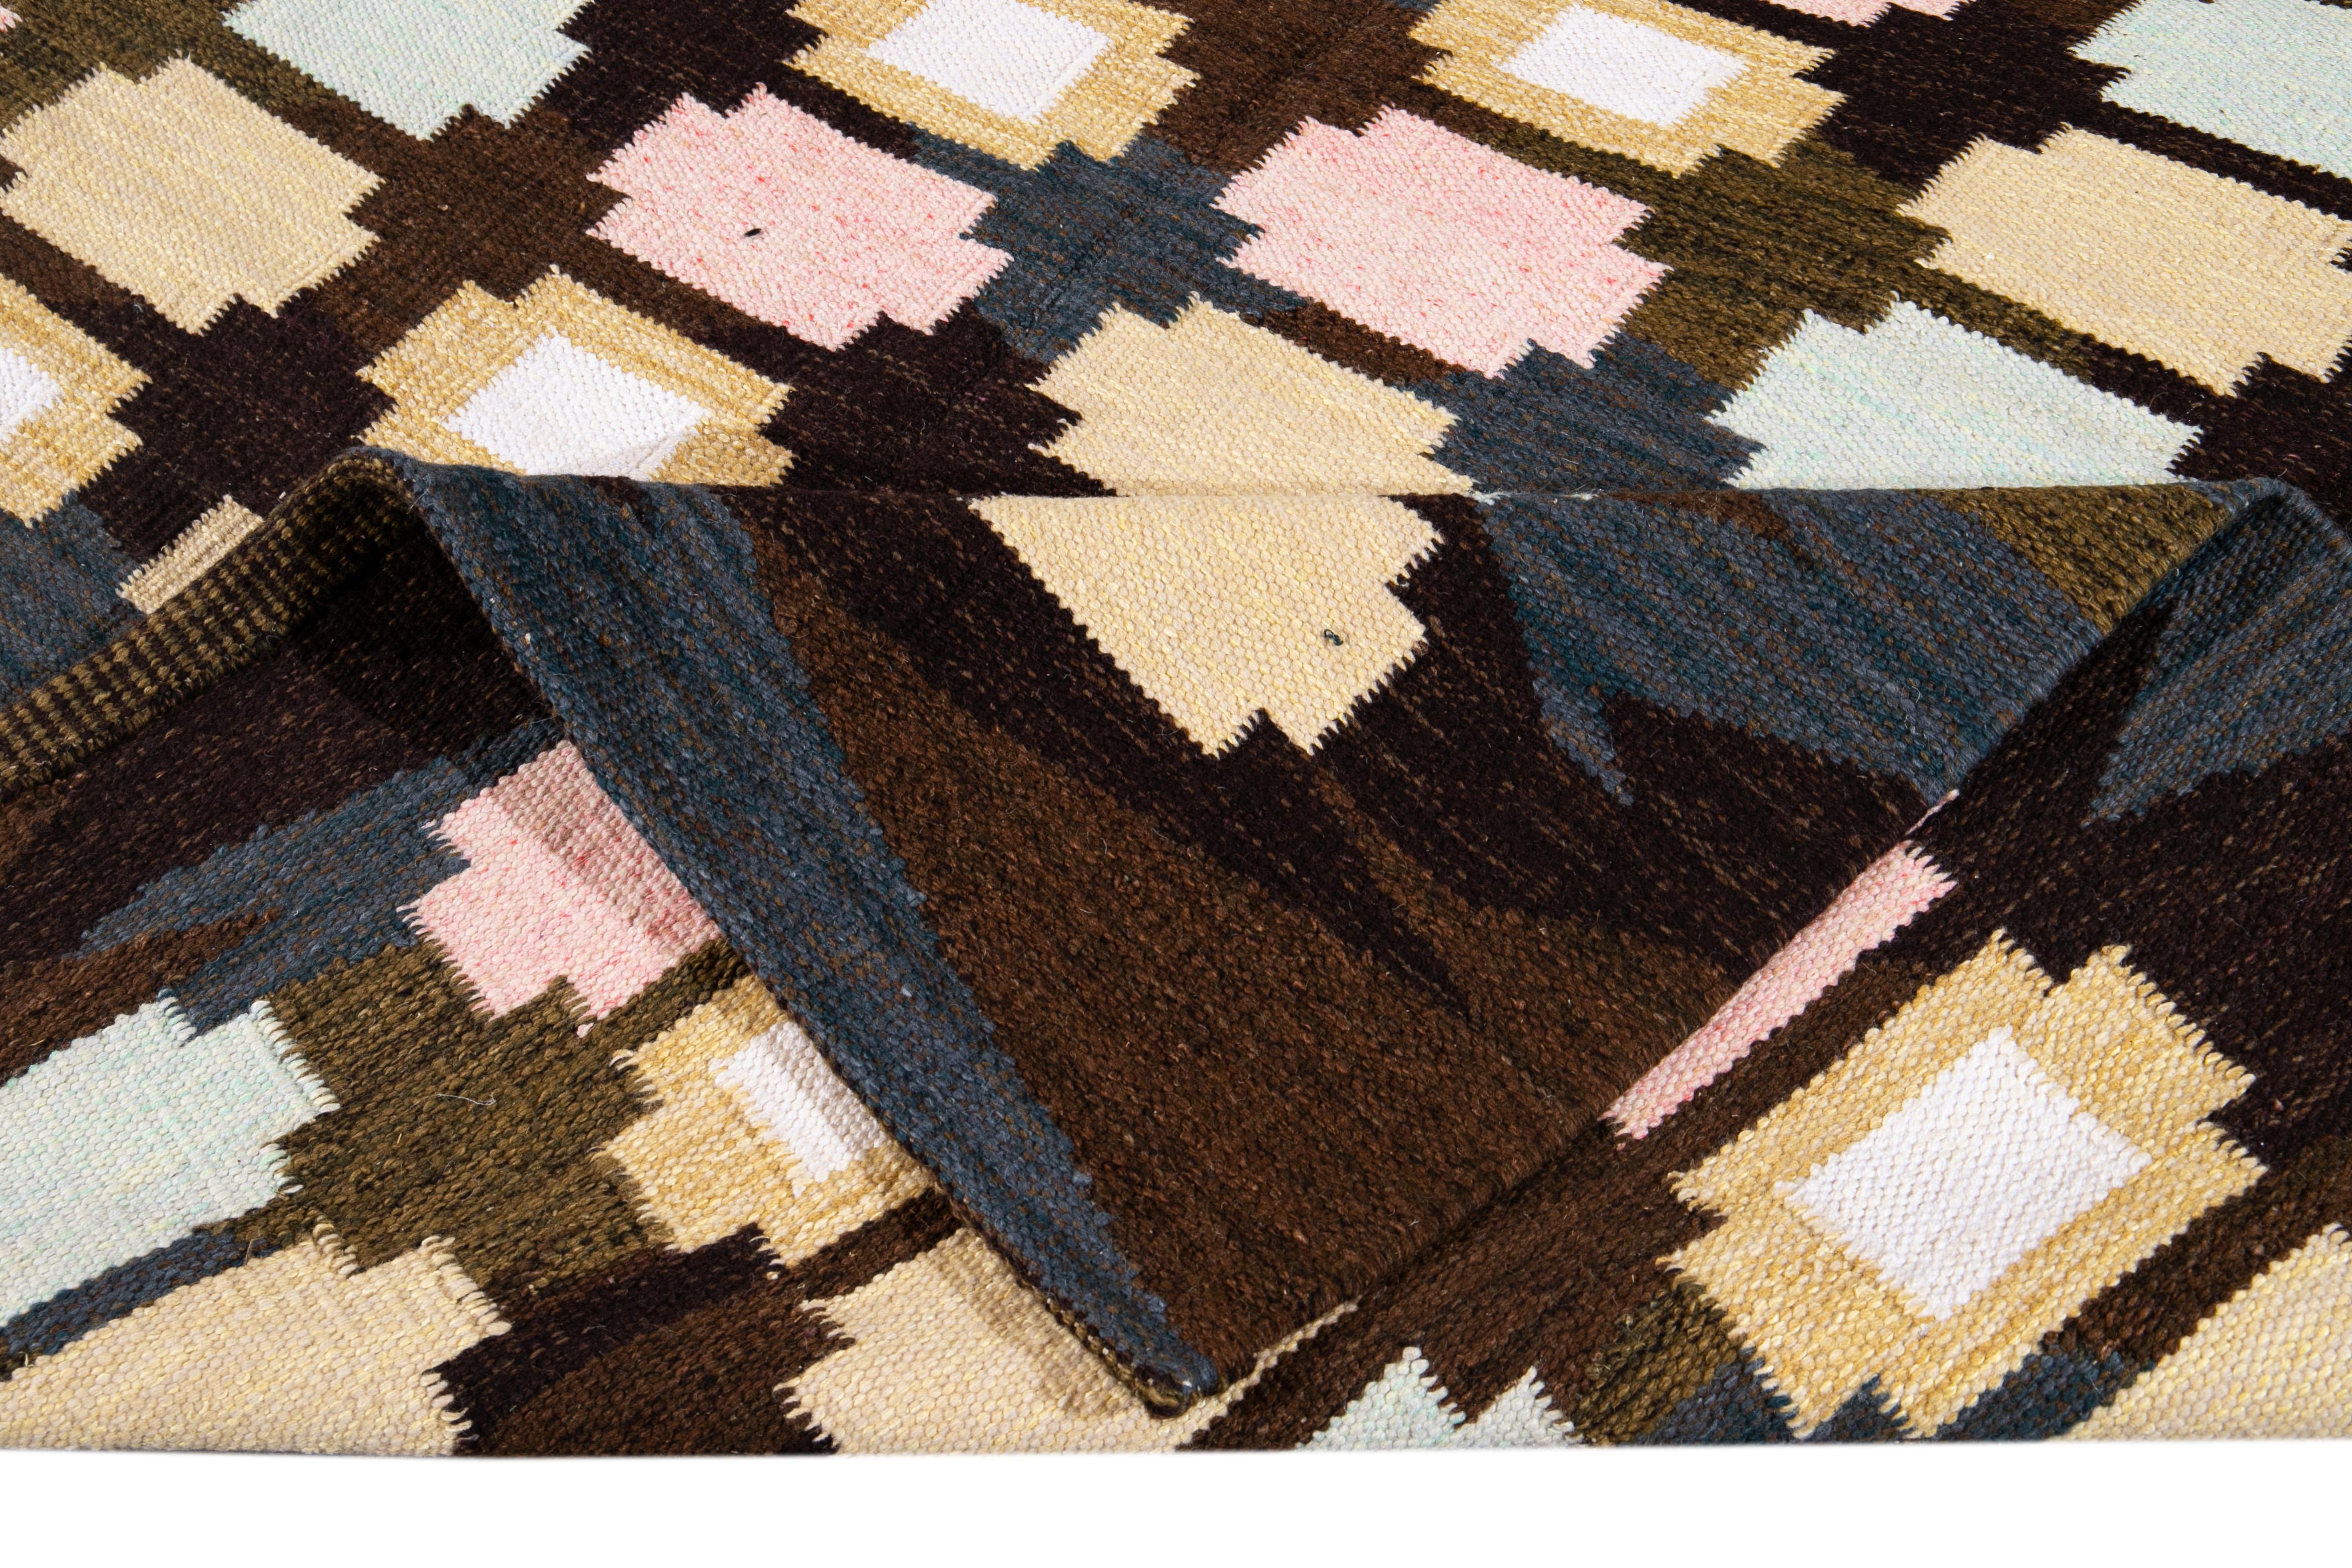 Beautiful Modern Swedish-Style with brownfield and multicolored geometric patterns all over the rug. 

This rug measures 8' 3